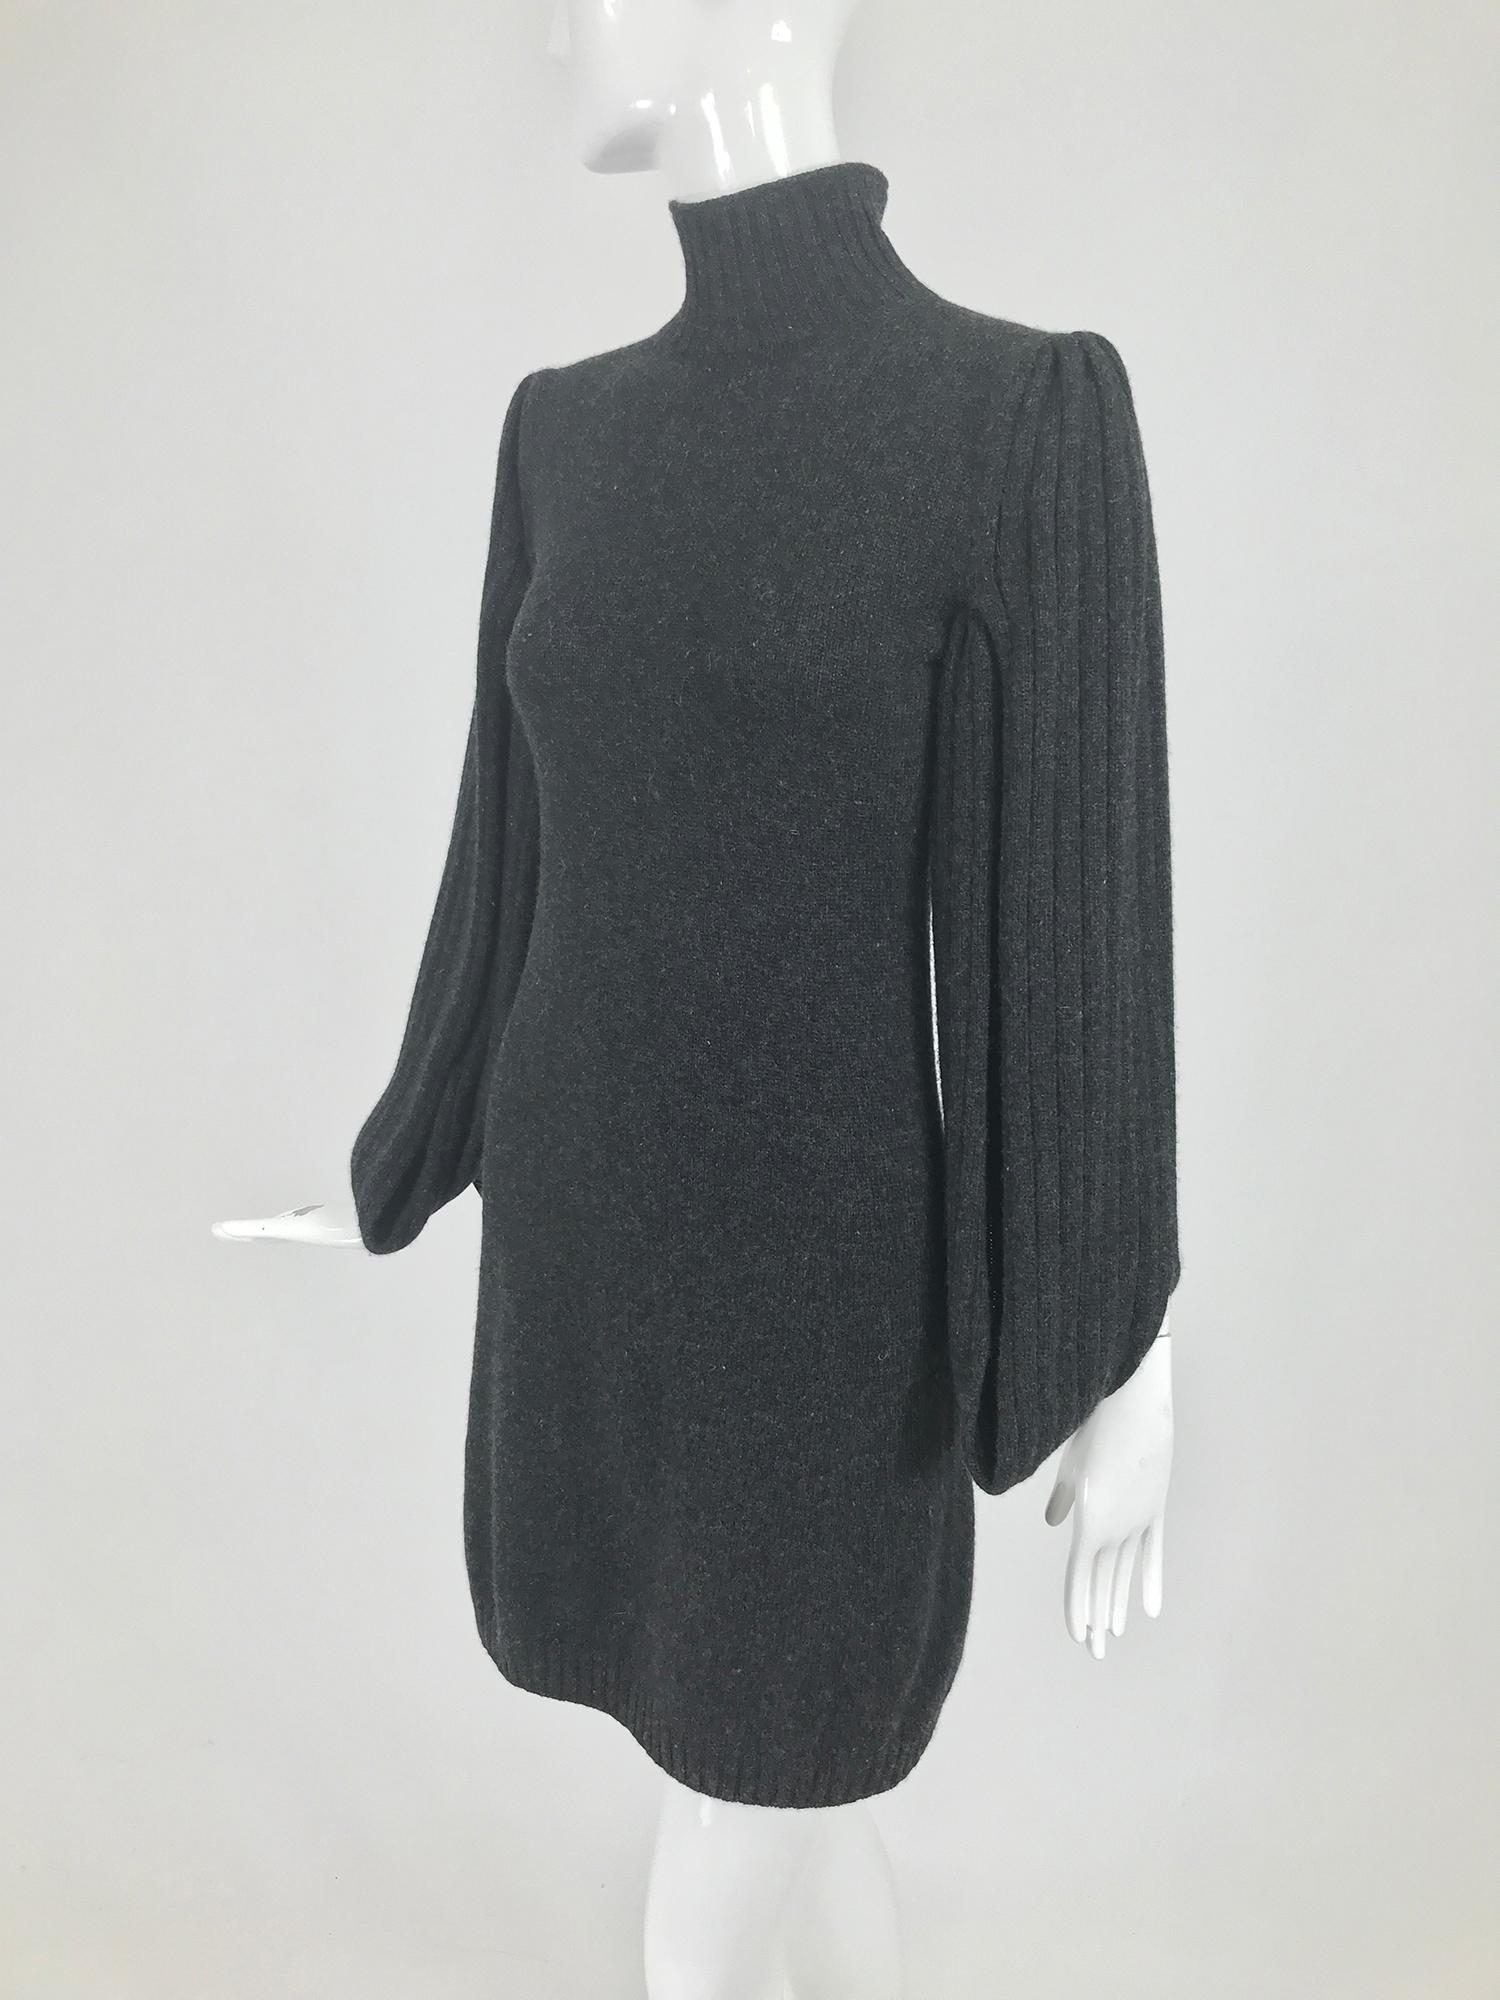 Chanel Charcoal Grey Cashmere Cage Sleeve Dress 2007a 3